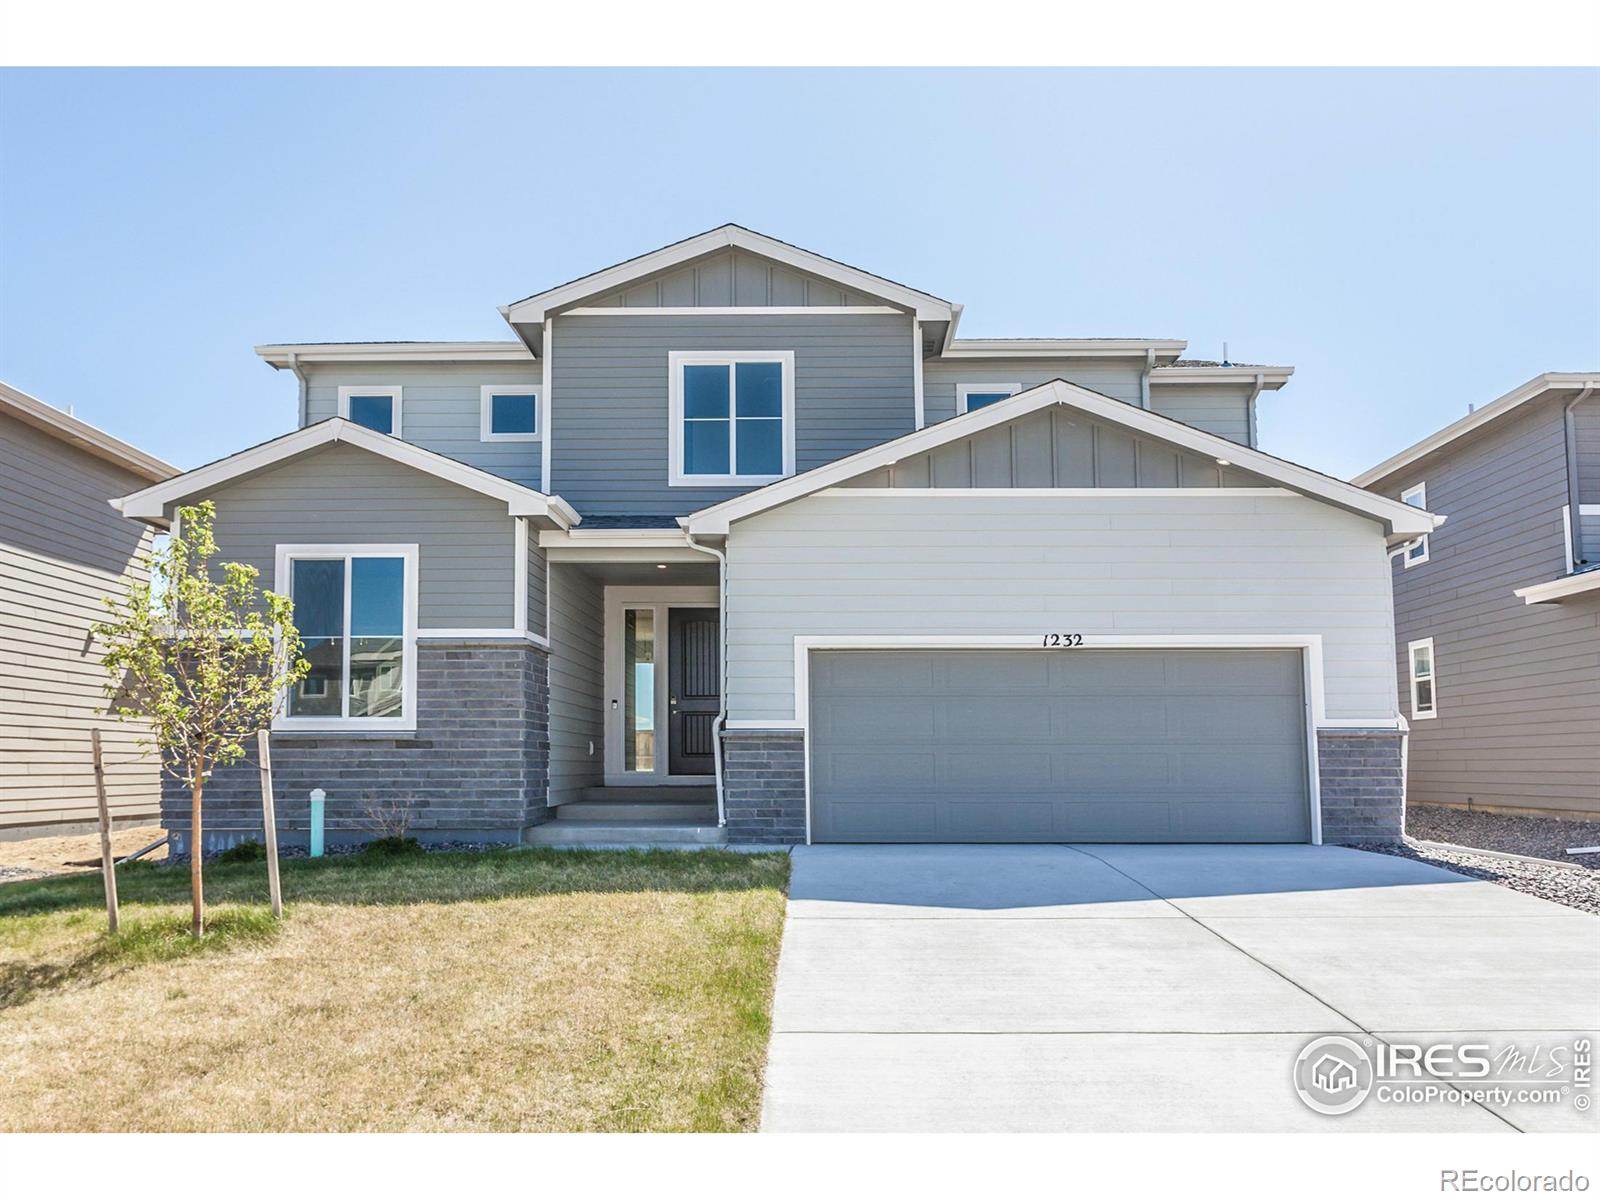 1232  104th Ave Ct, greeley MLS: 4567891009251 Beds: 4 Baths: 3 Price: $538,806